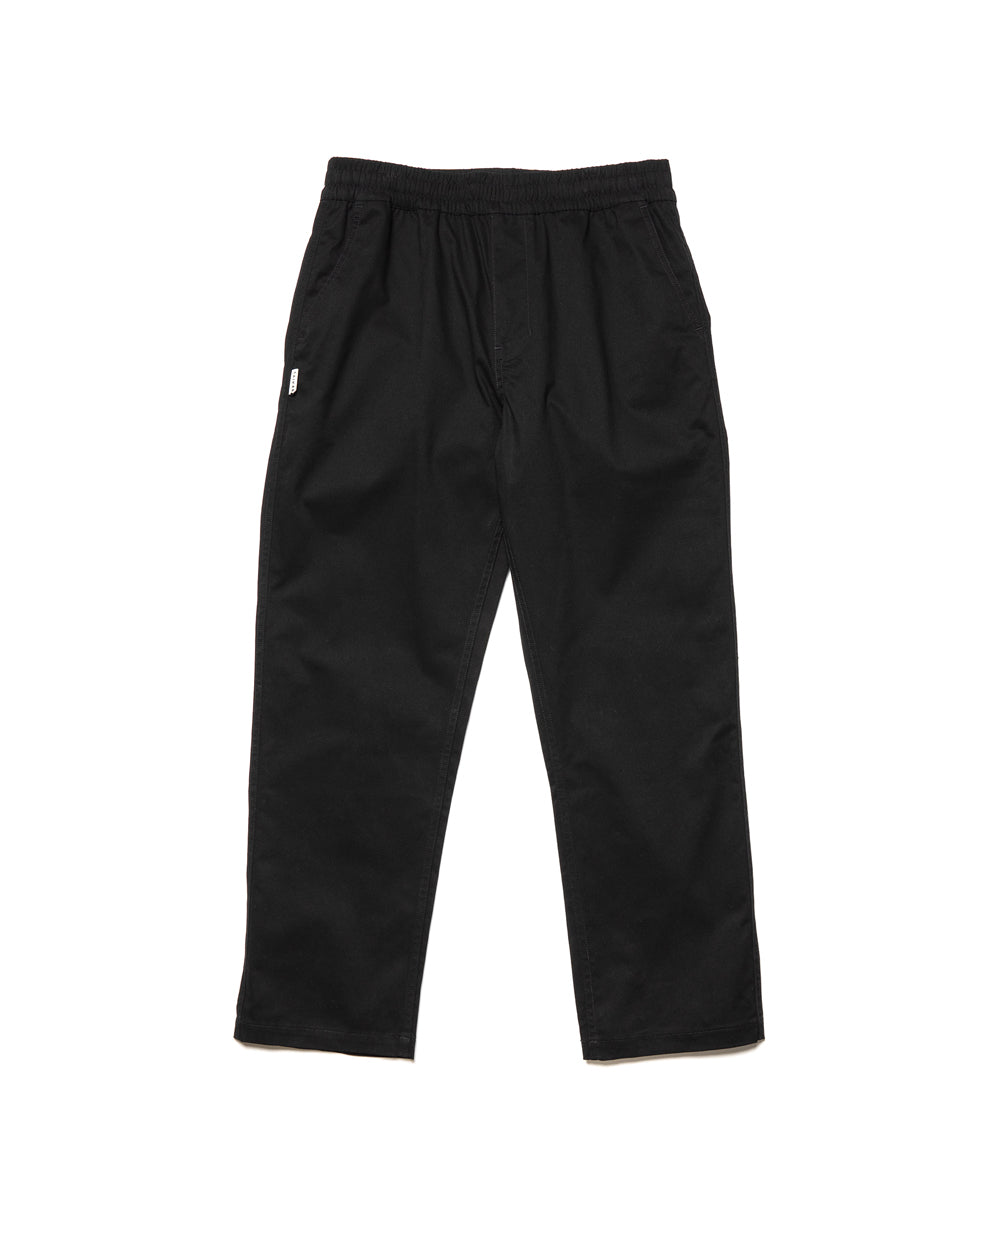 Taikan Men's Relaxed Chino in Black flat lay